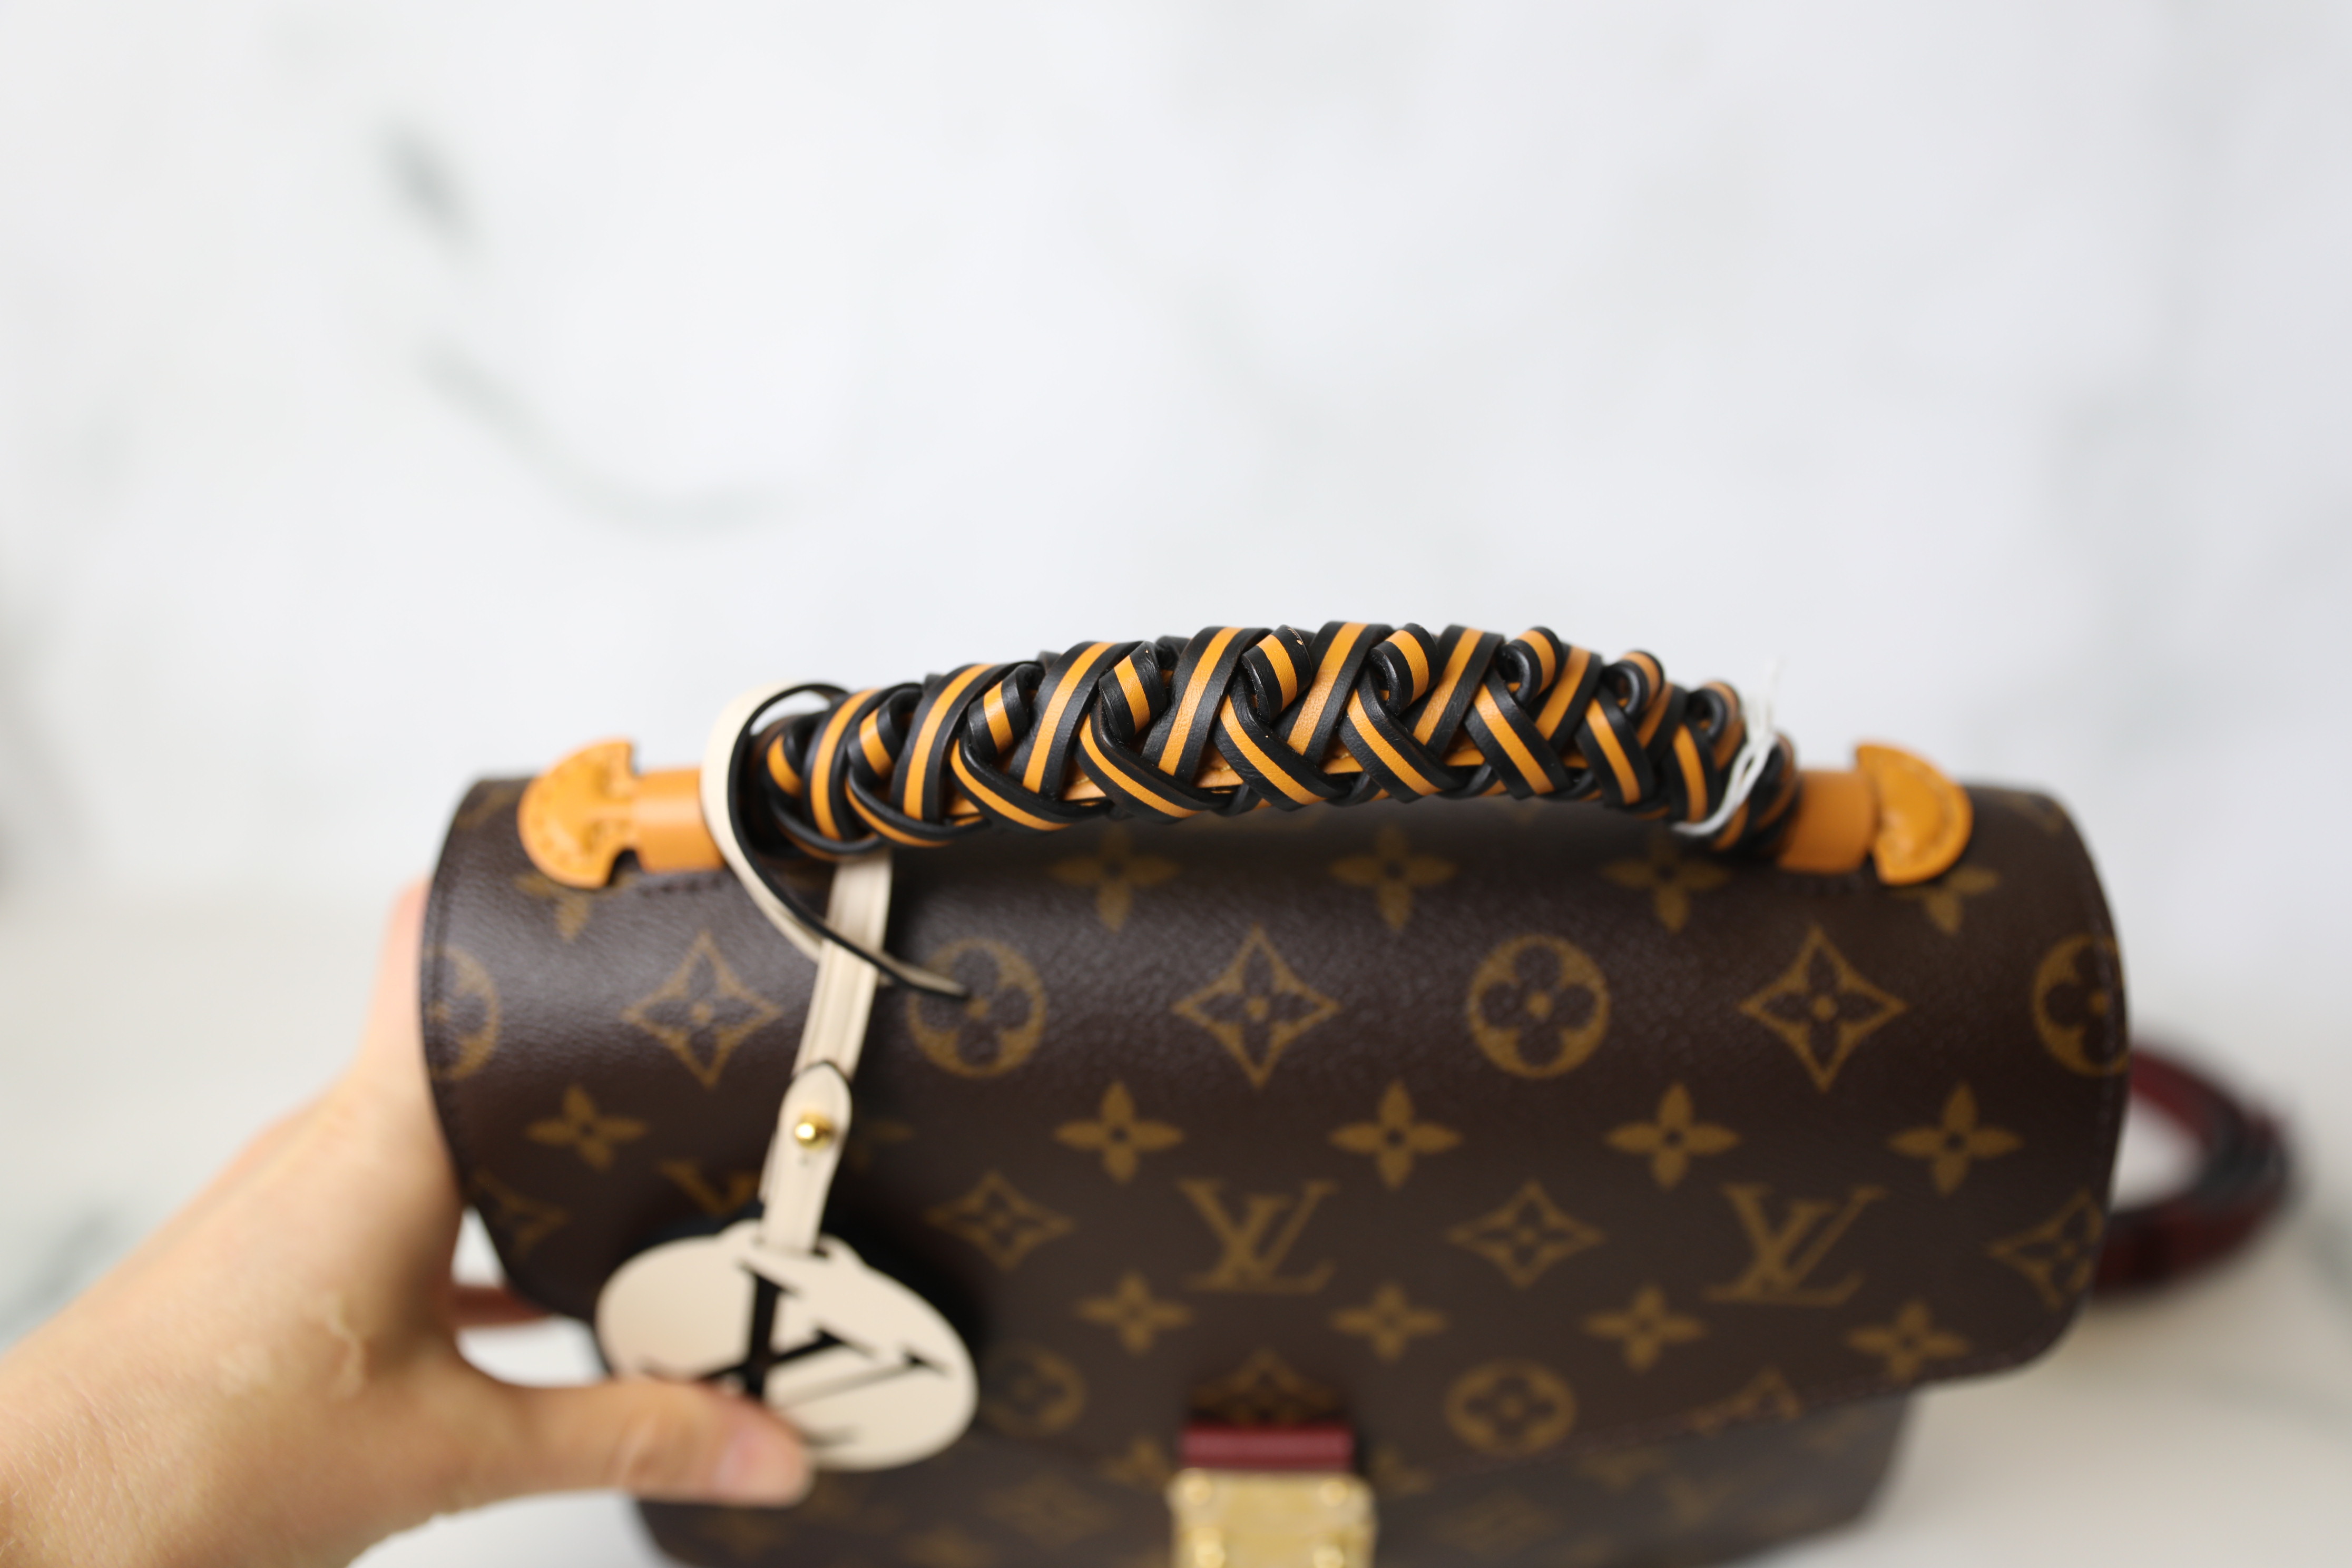 Louis Vuitton Pochette Metis with Braided Handle, New in Dustbag